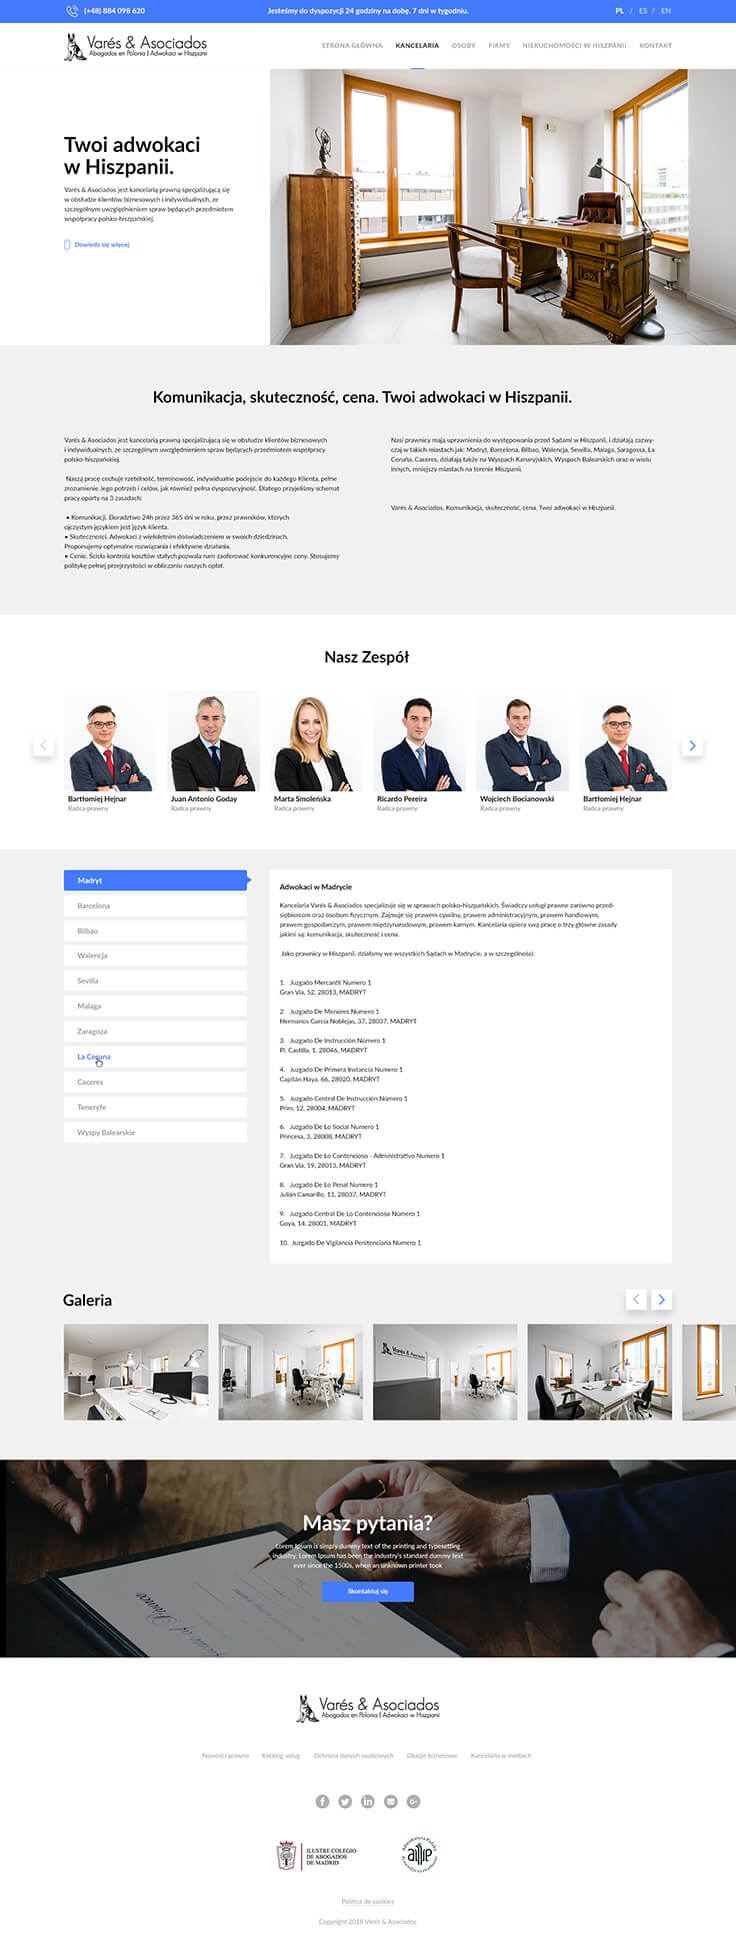 Webdesign - Vares, about the Law Firm